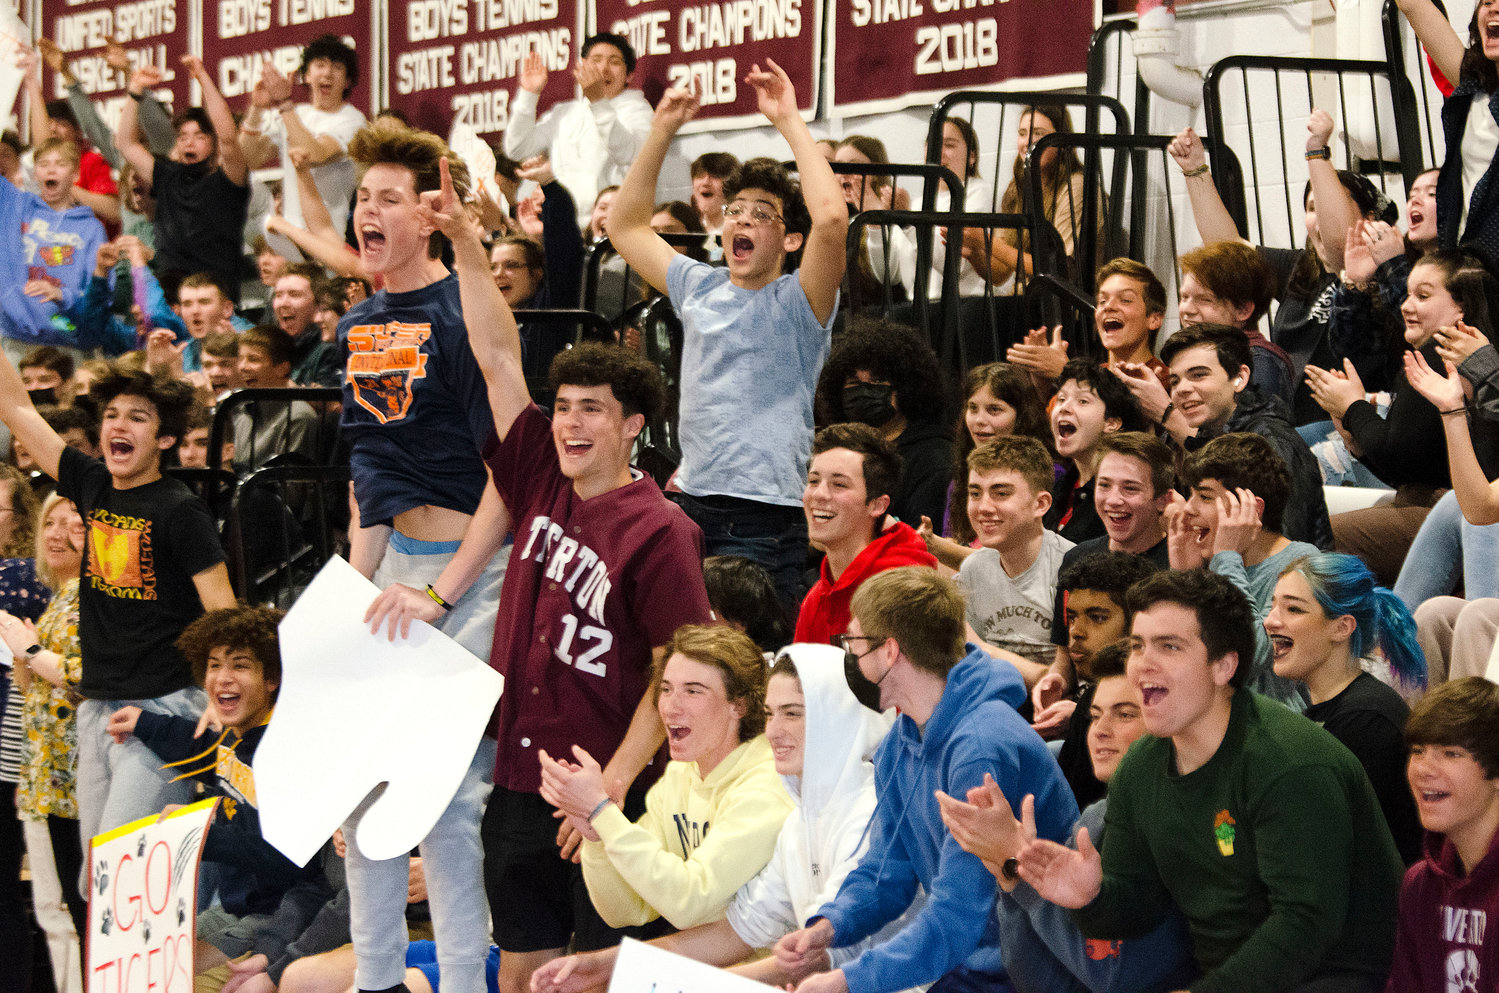 Jason Potvin (mid-left), Jordan Panell (in maroon) and the crowd cheer after crowd favorite Aidan McCrosson makes a basket. 